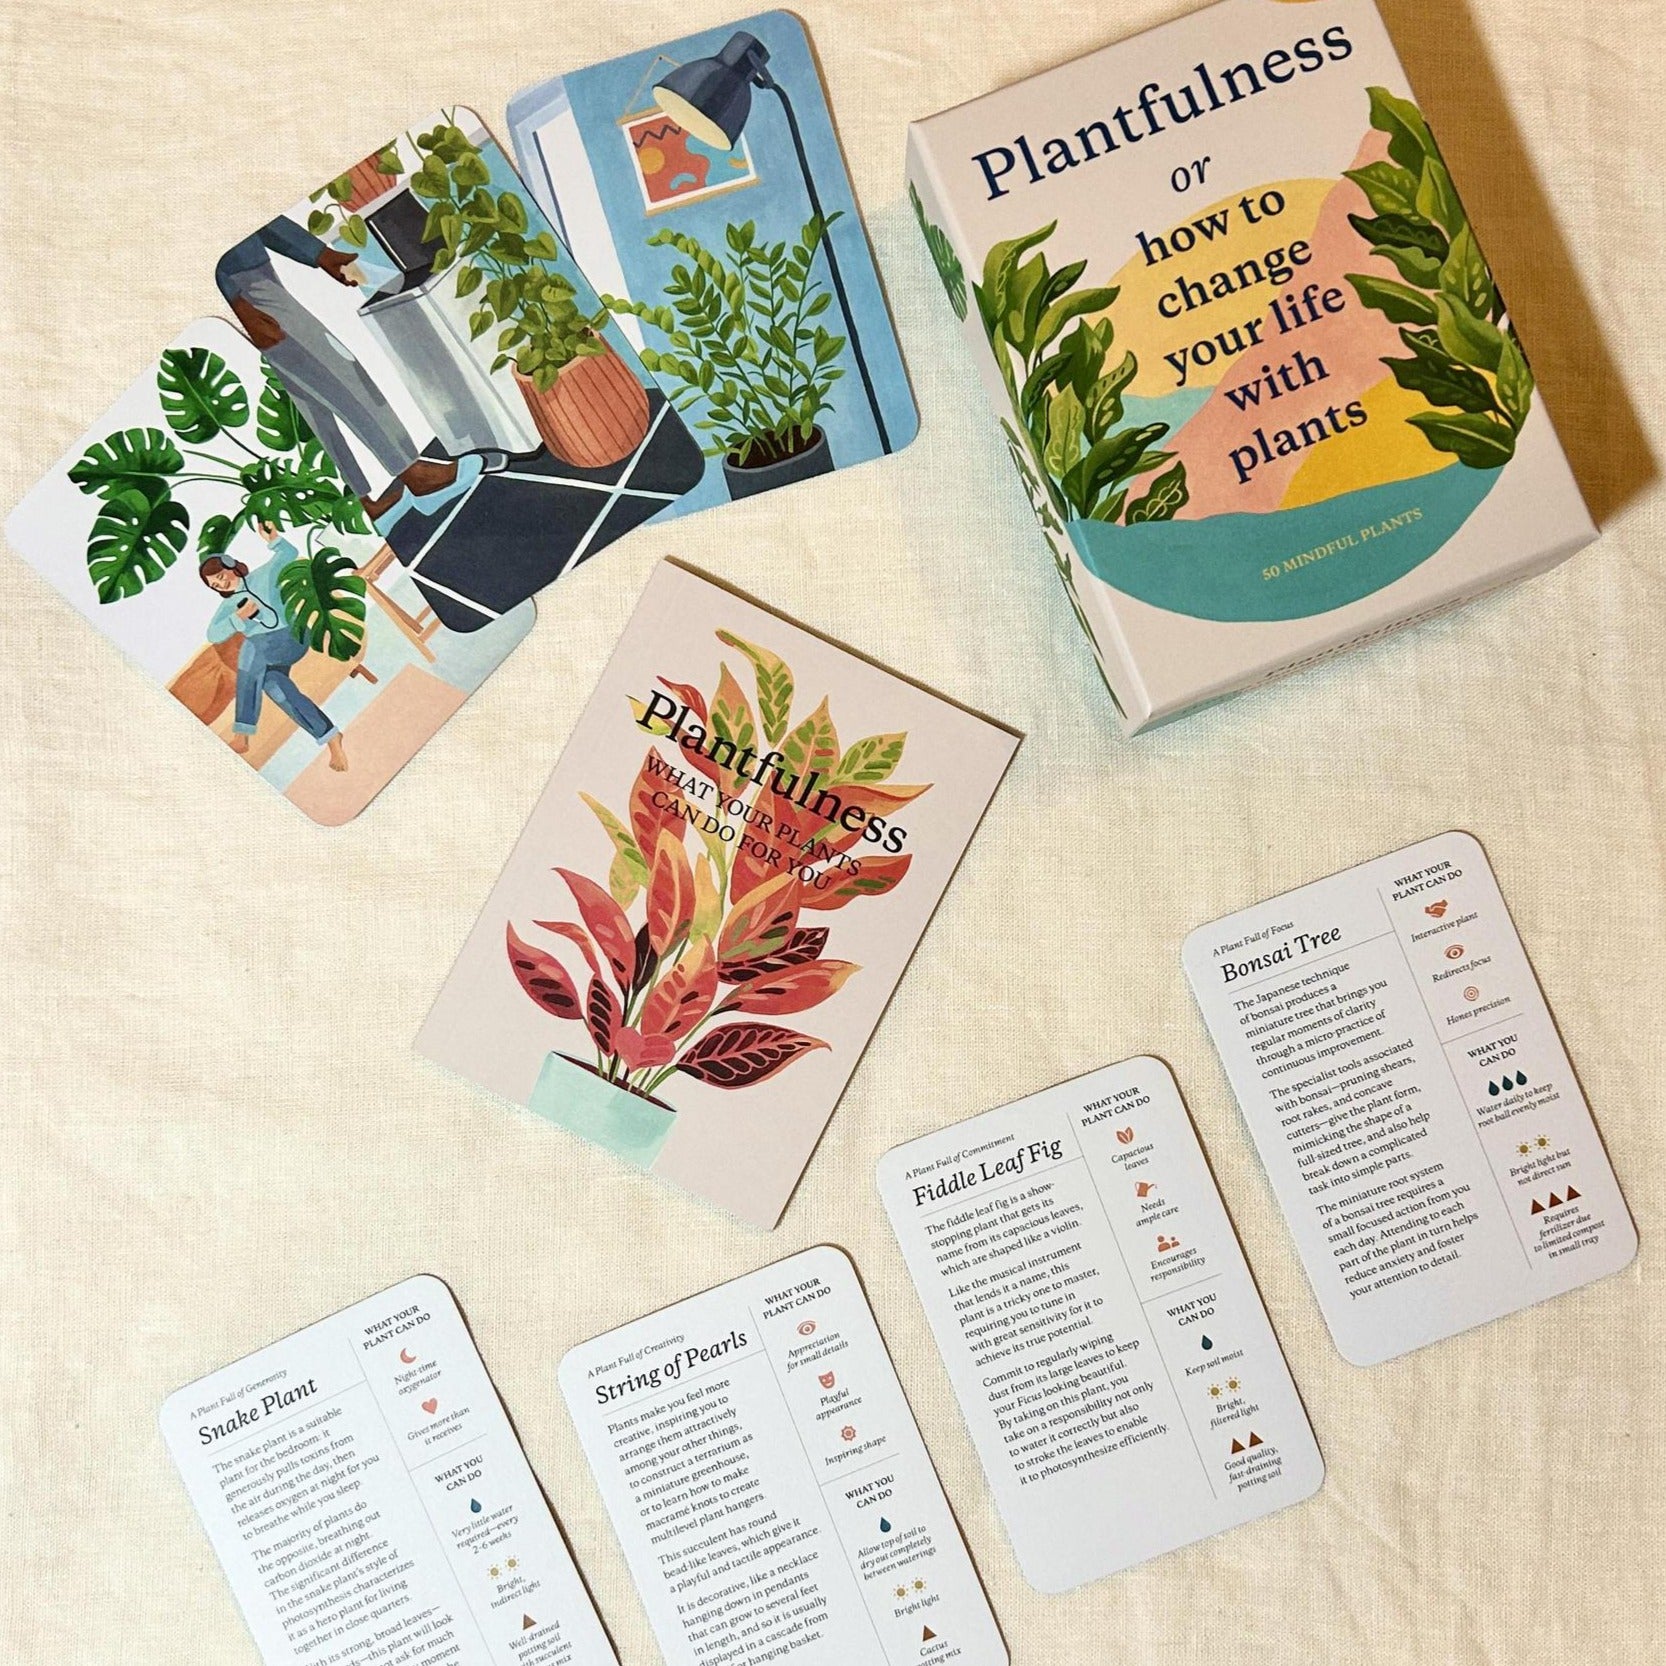 Plantfulness or How to Change Your Life With Plants